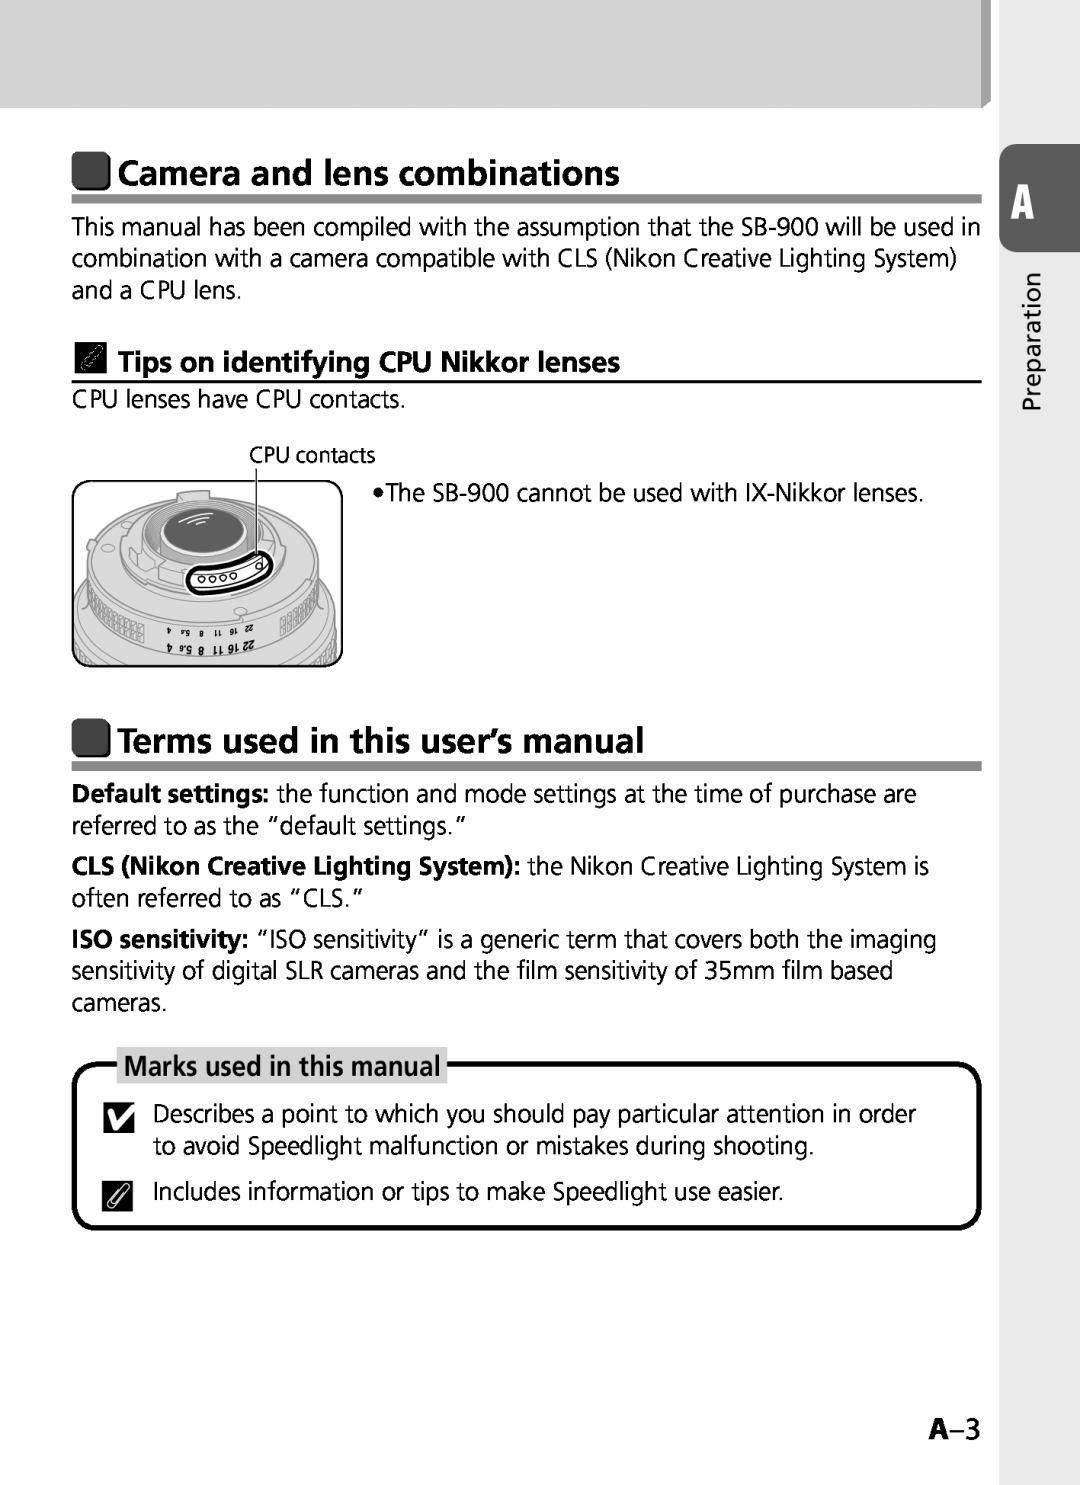 Univex SB-900 Camera and lens combinations, Terms used in this user’s manual, tTips on identifying CPU Nikkor lenses 